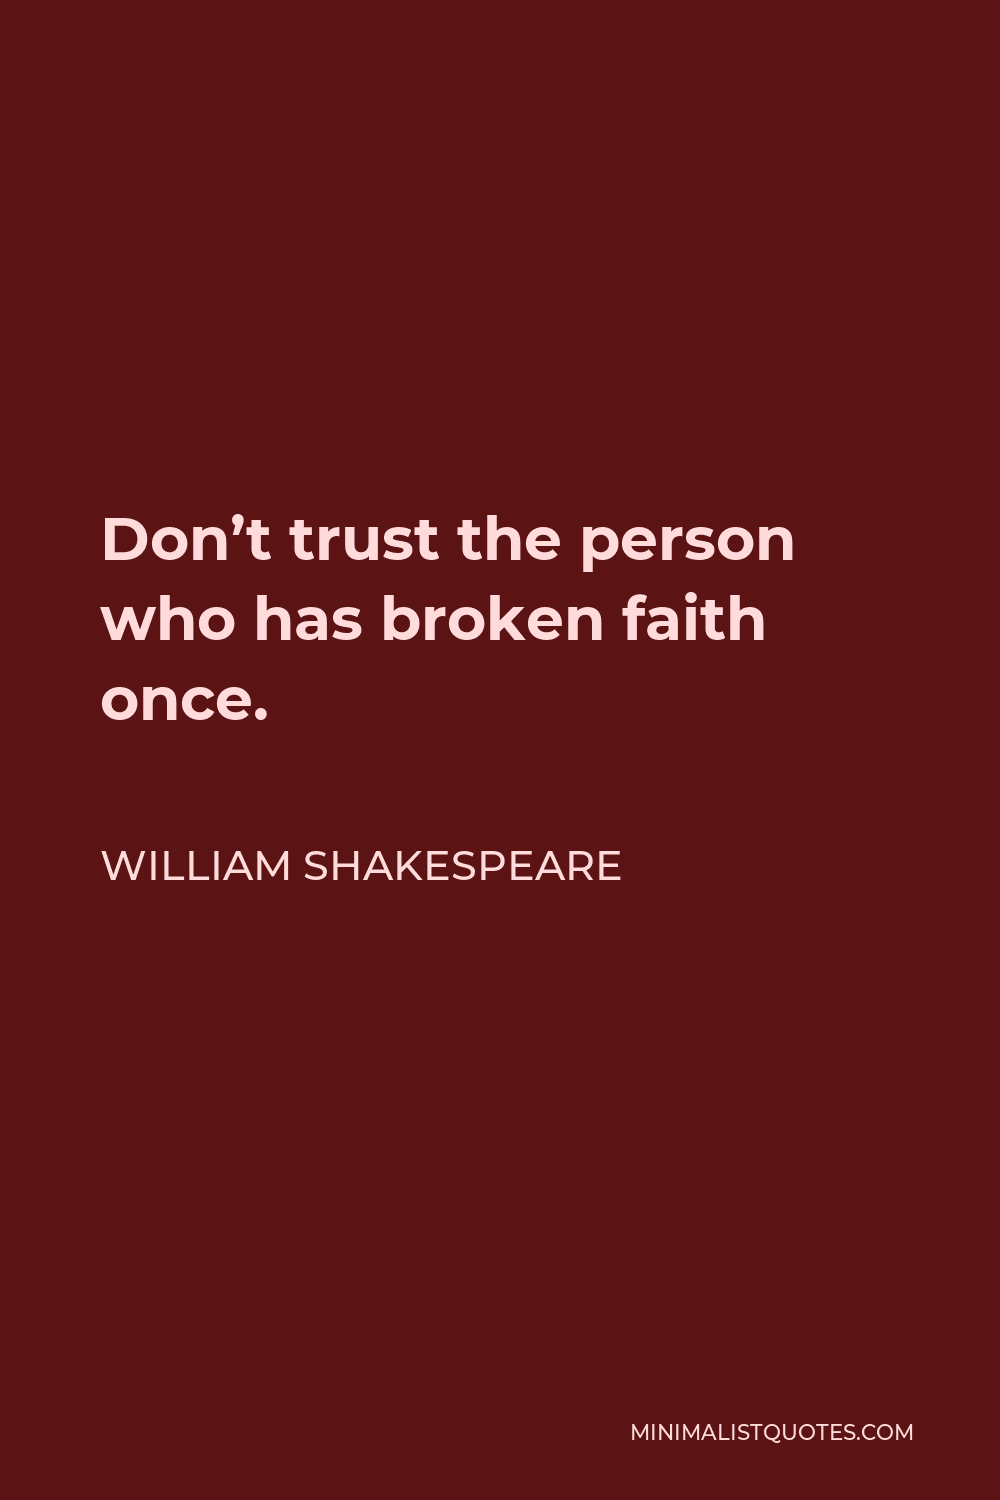 William Shakespeare Quote - Don’t trust the person who has broken faith once.